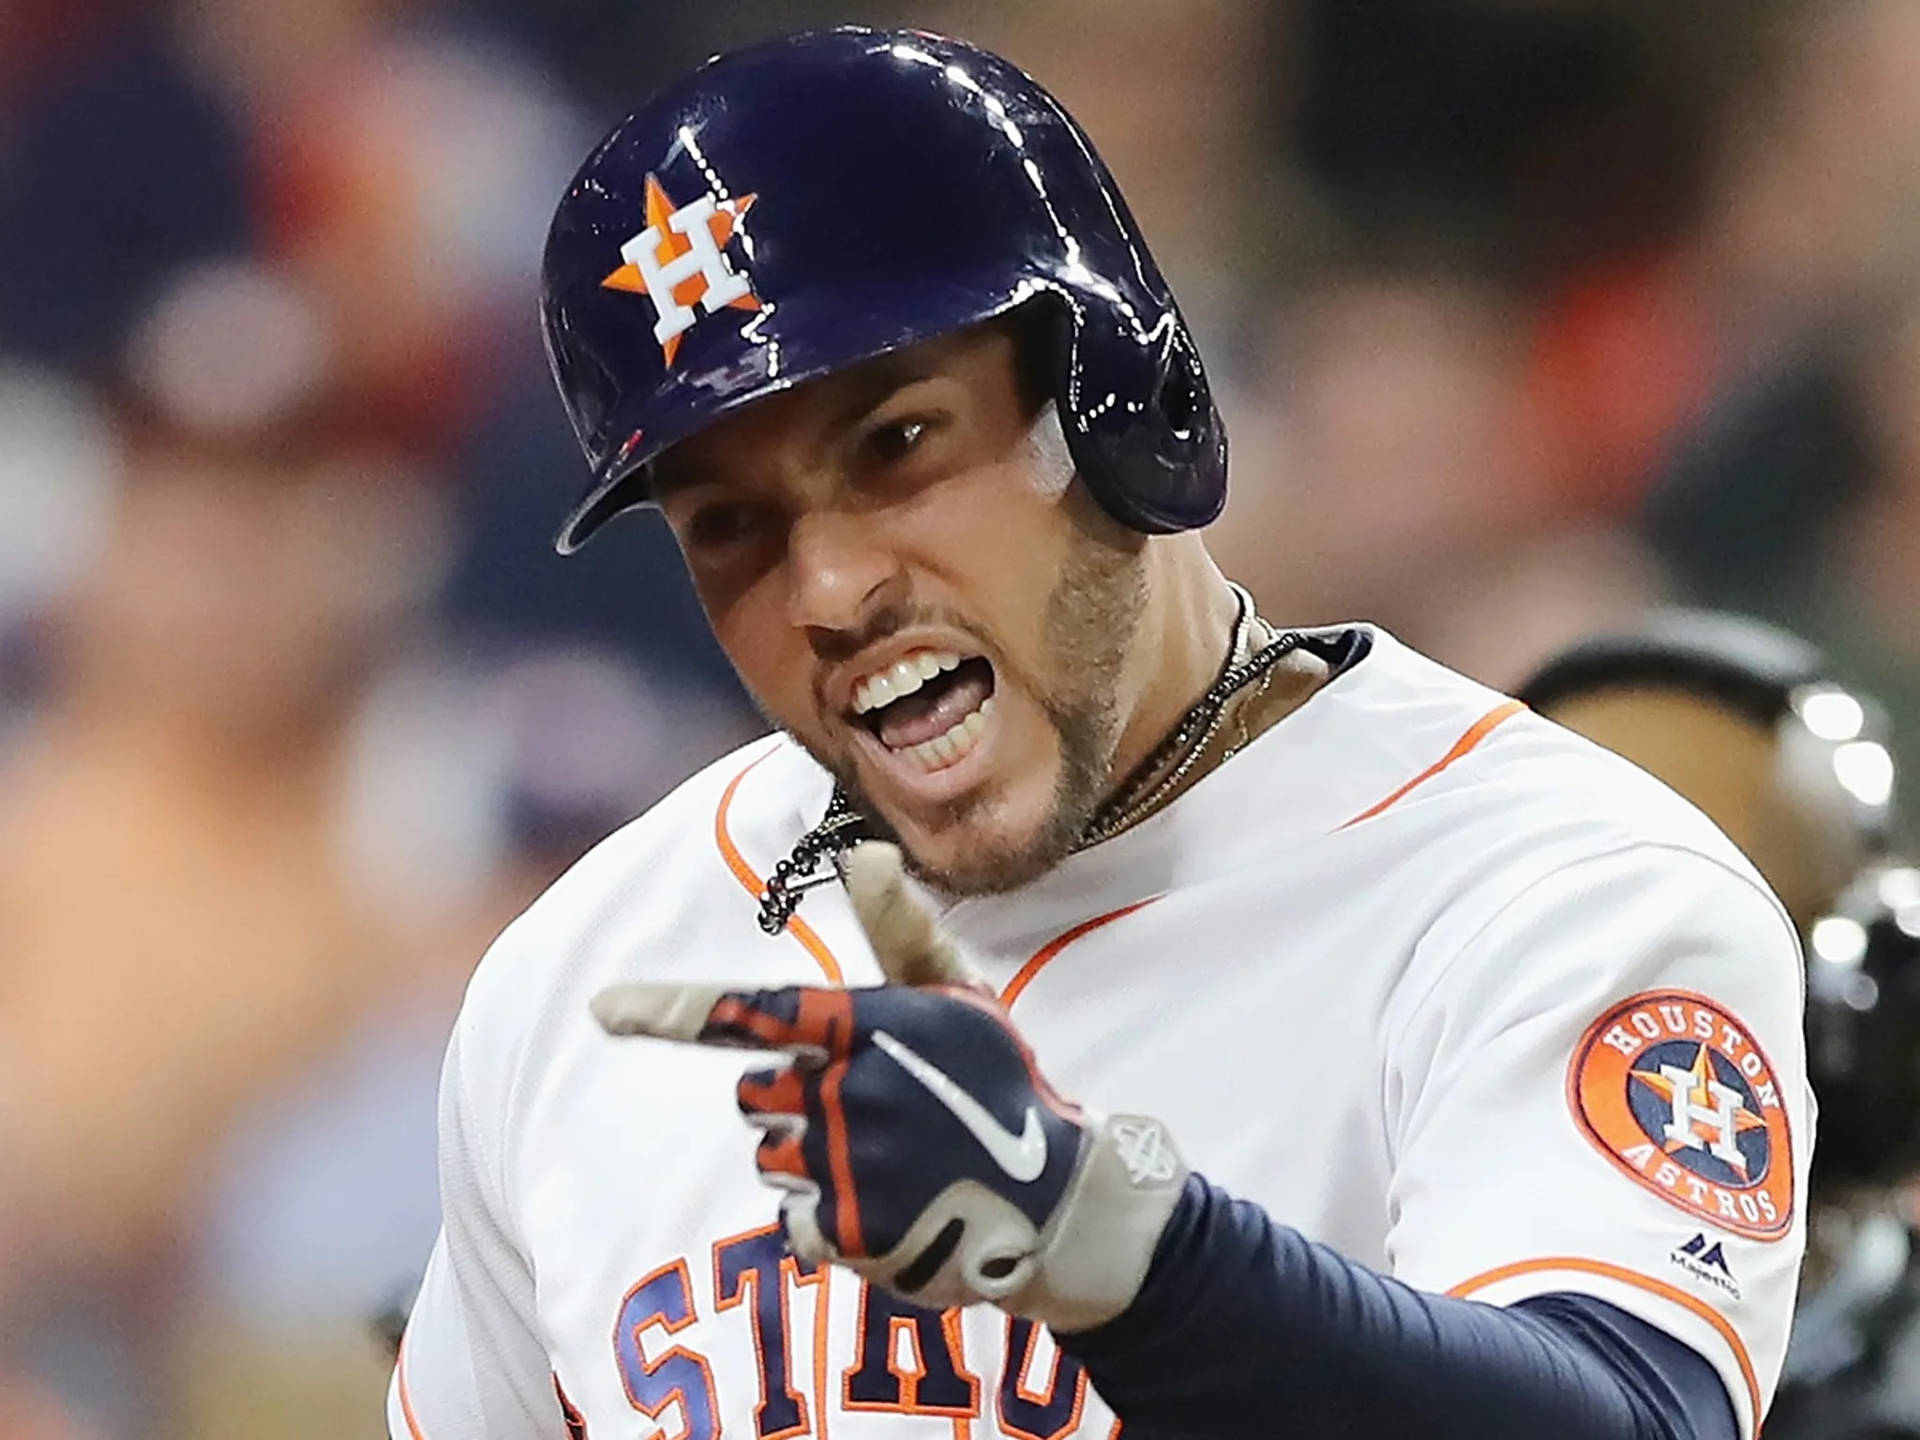 Download George Springer Angry Face Houston Astros Wallpaper